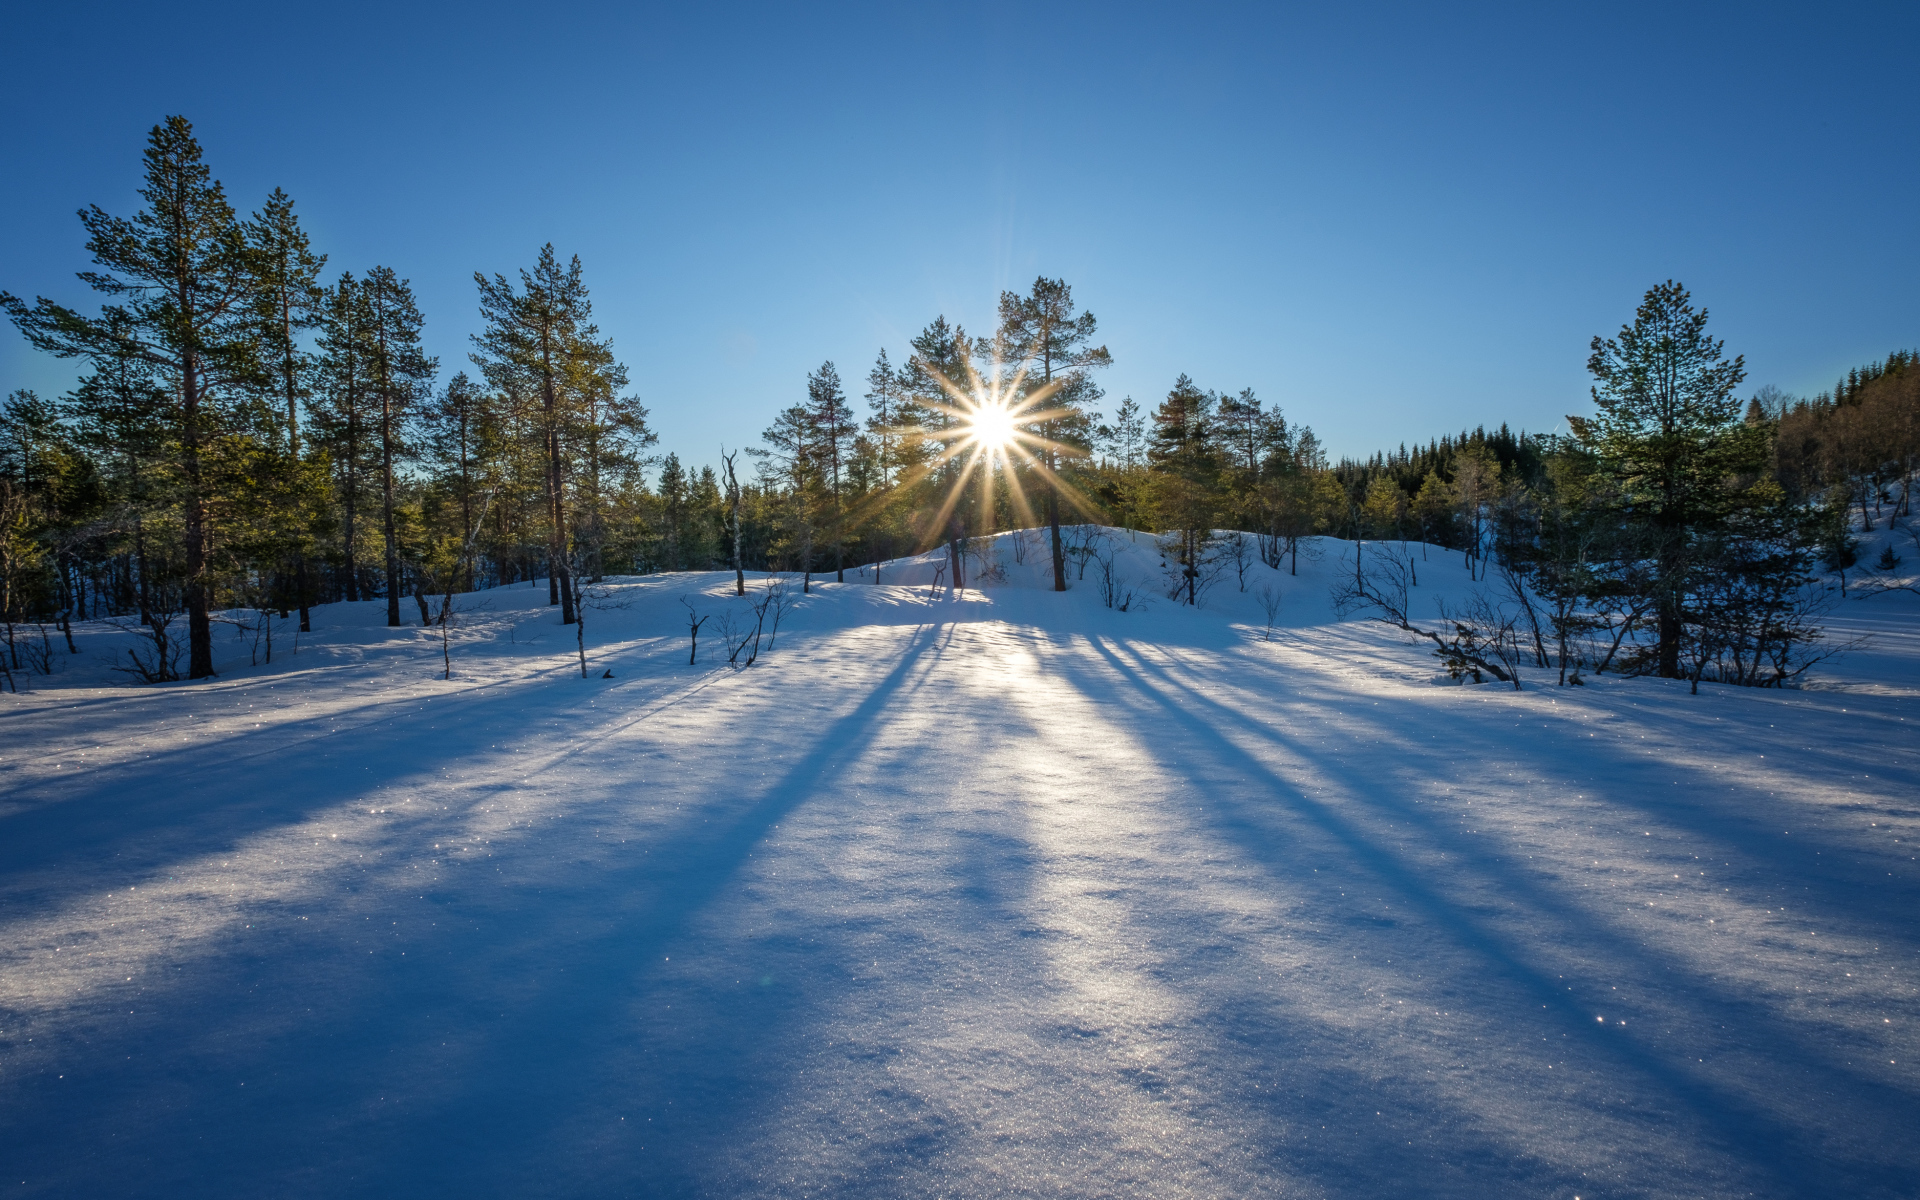 Rays of bright winter sun on a snowy surface in the forest